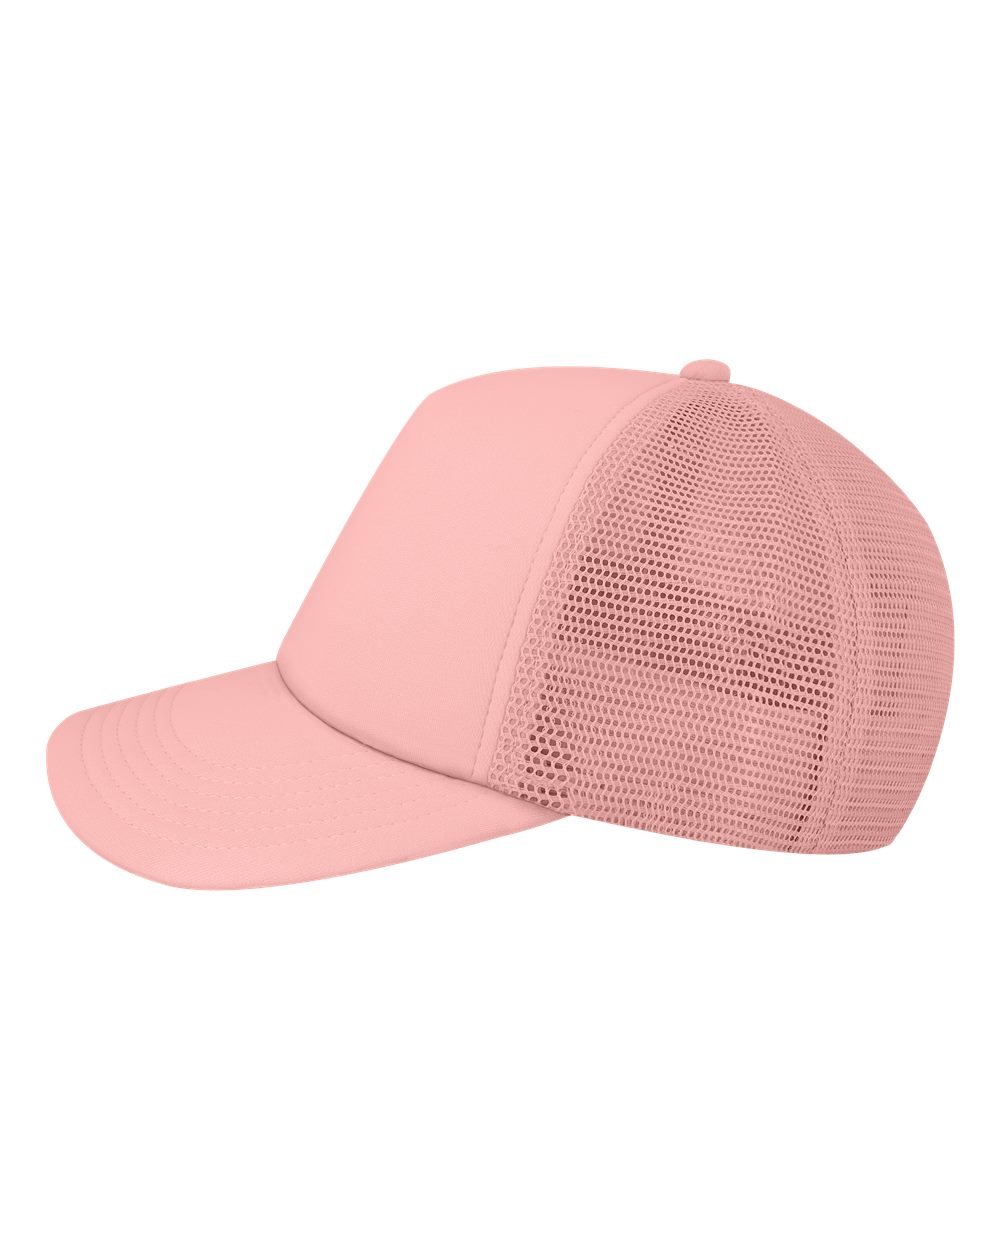 Dusty Rose Pink Trucker Hat with Coffee Embroidery